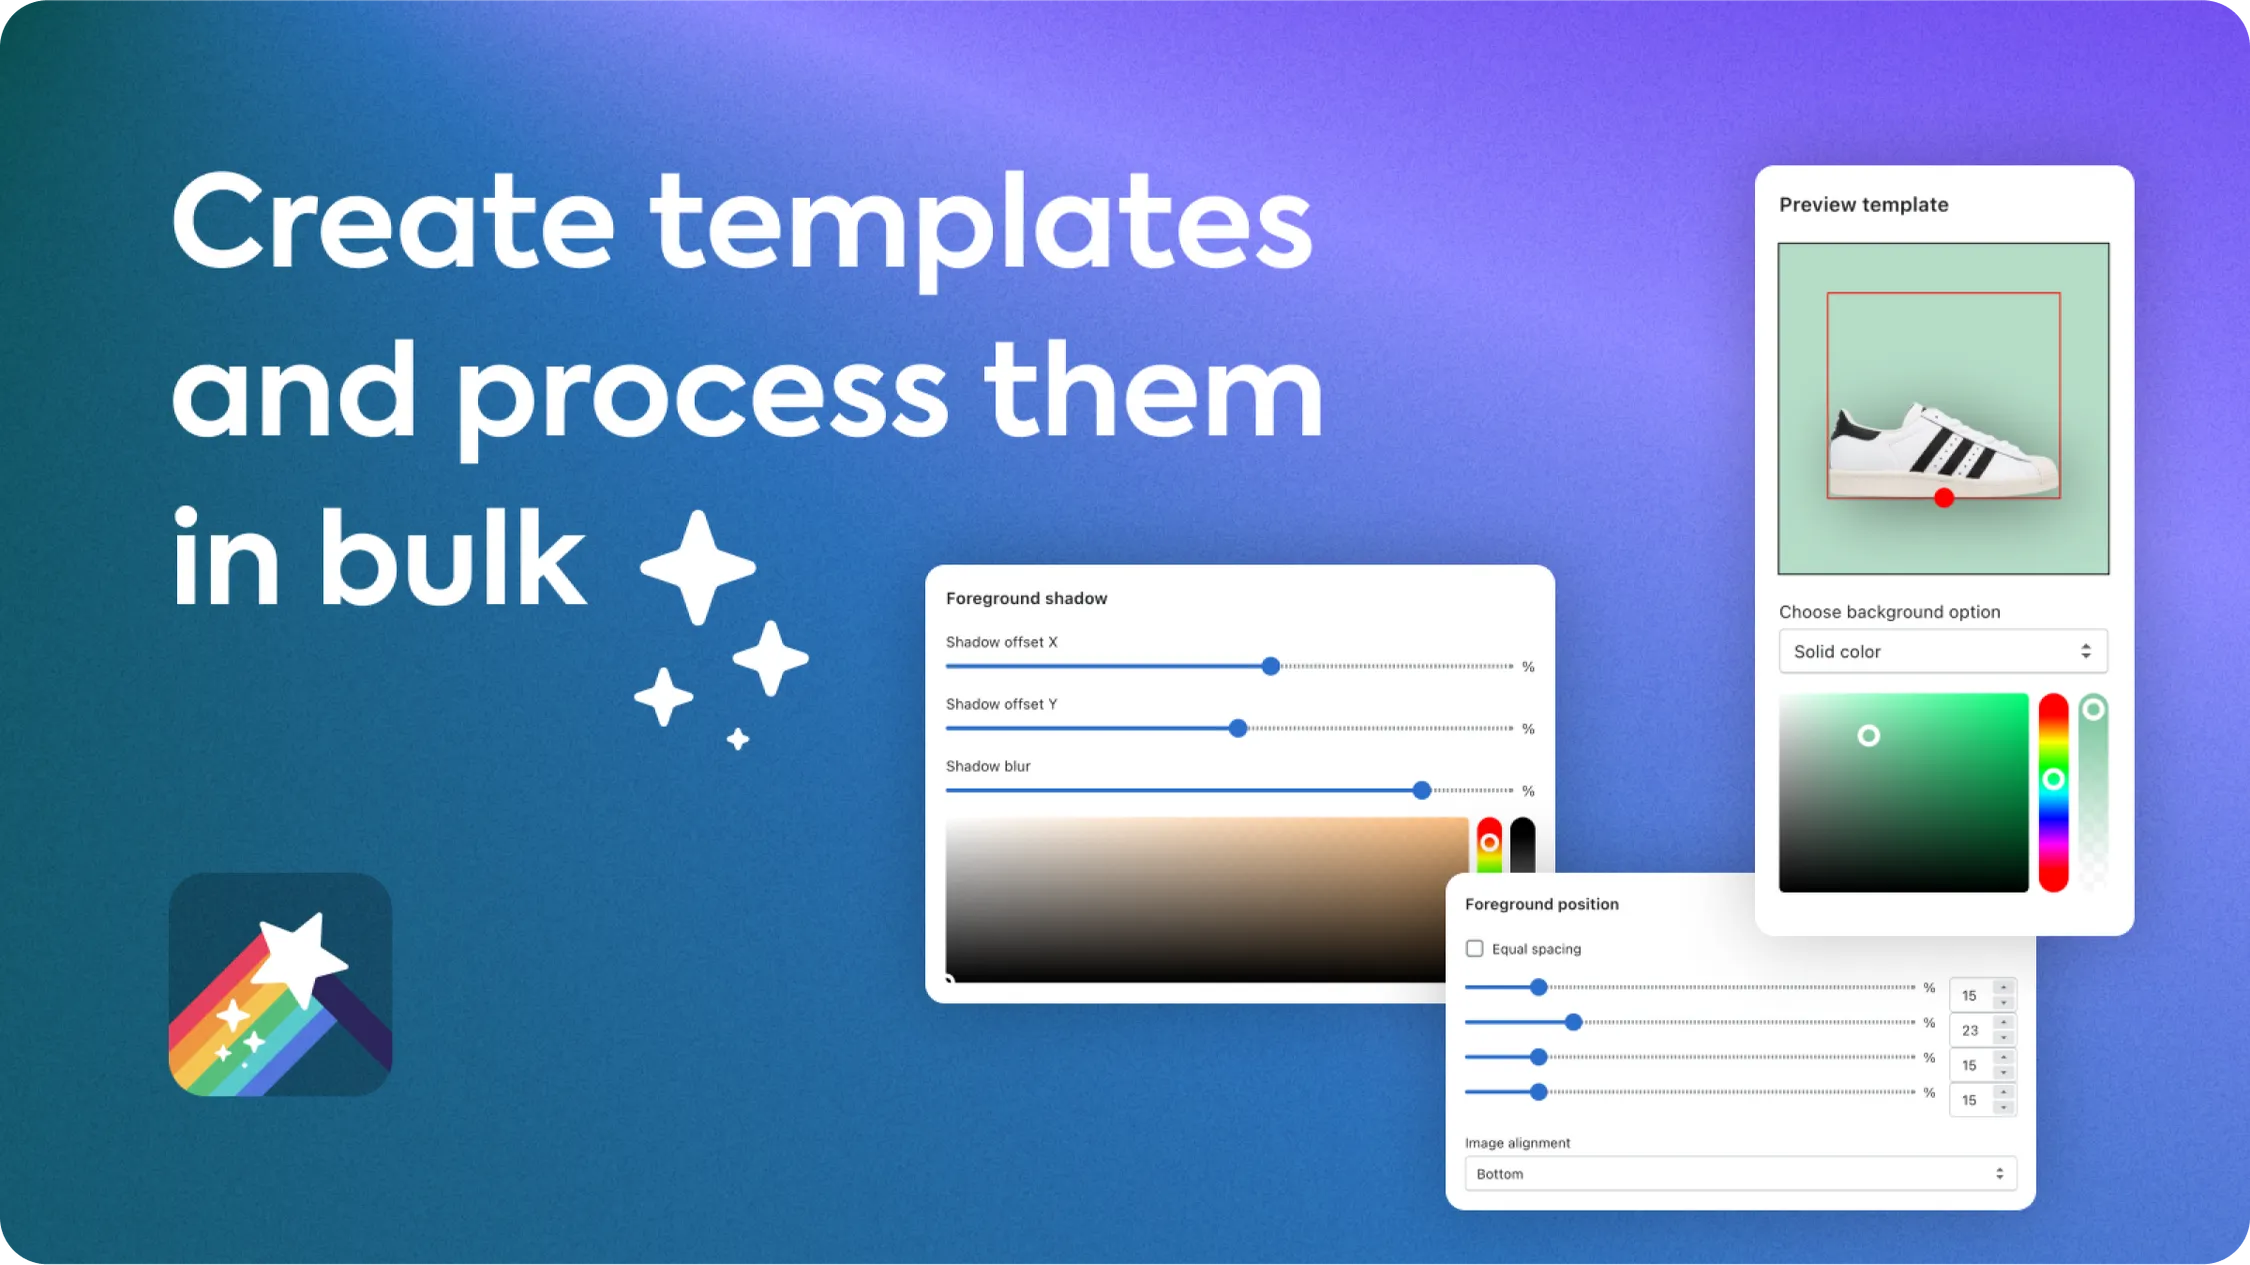 Create templates and process them in bulk